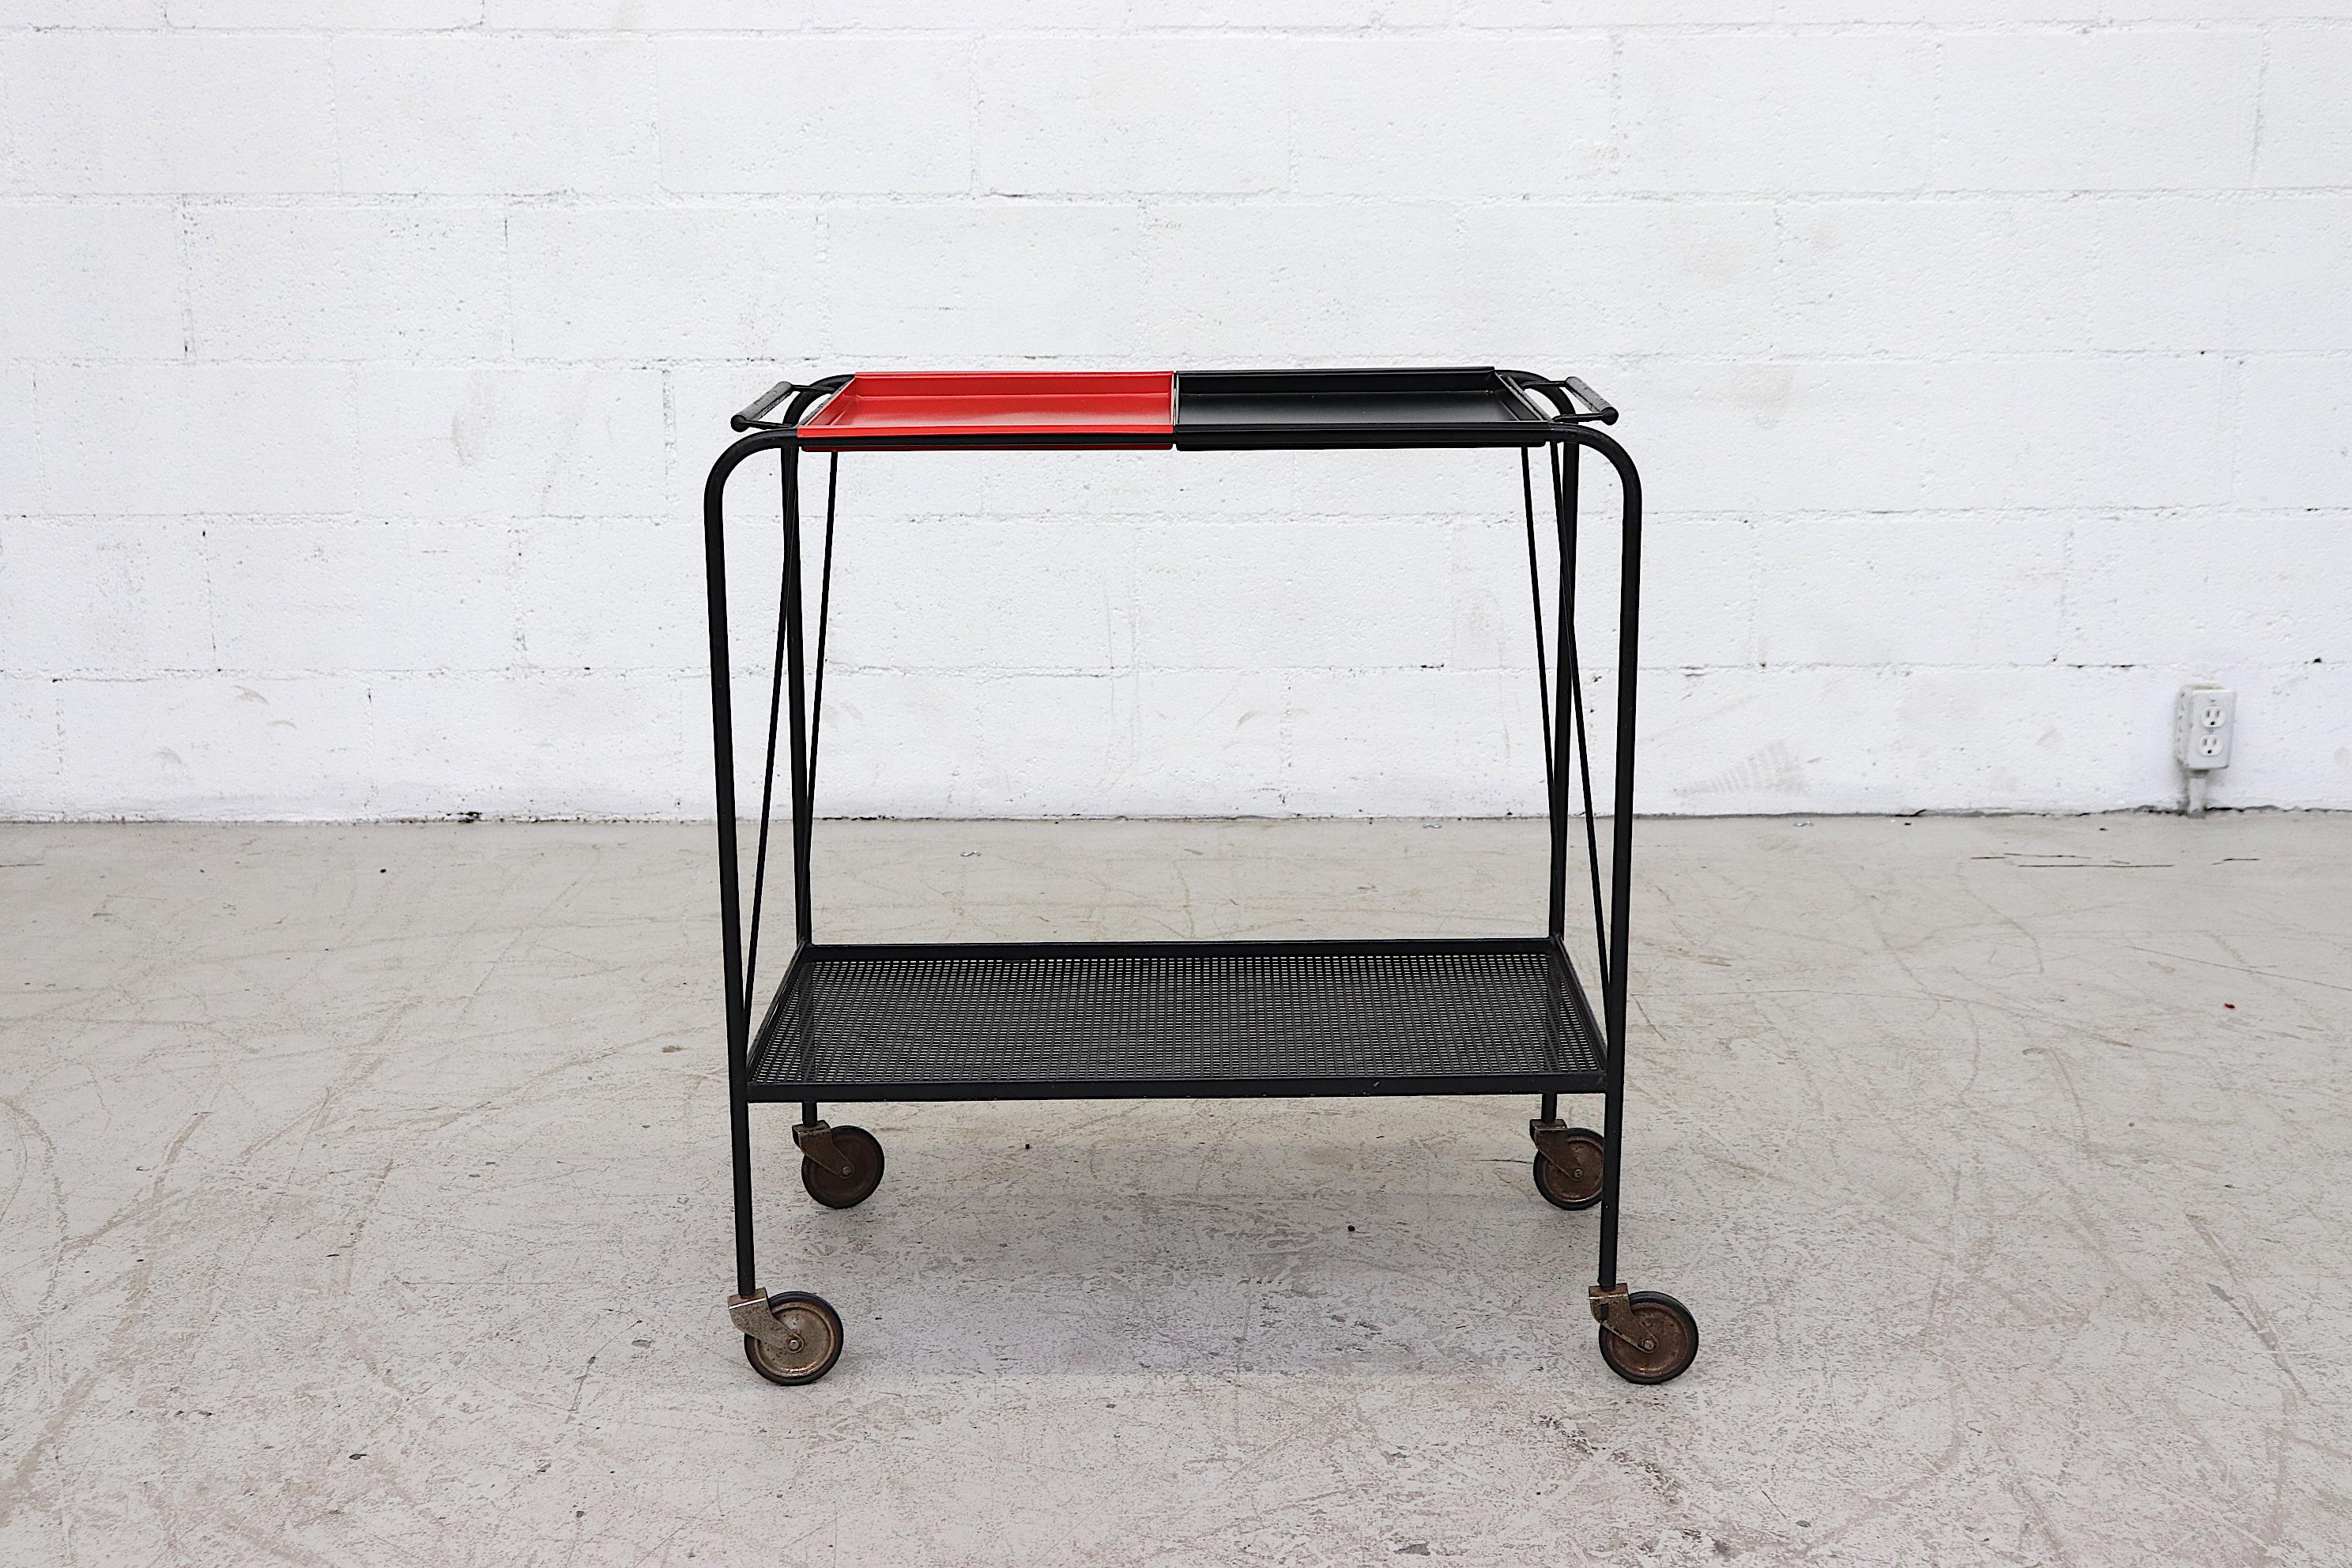 Handsome industrial bar cart by Tjerk Reijenga, for Pilastro. Black enameled frame and perforated metal lower shelf with newly powder coated black and red enameled removable metal trays. Beautiful and delicate lines. Frame in original condition with